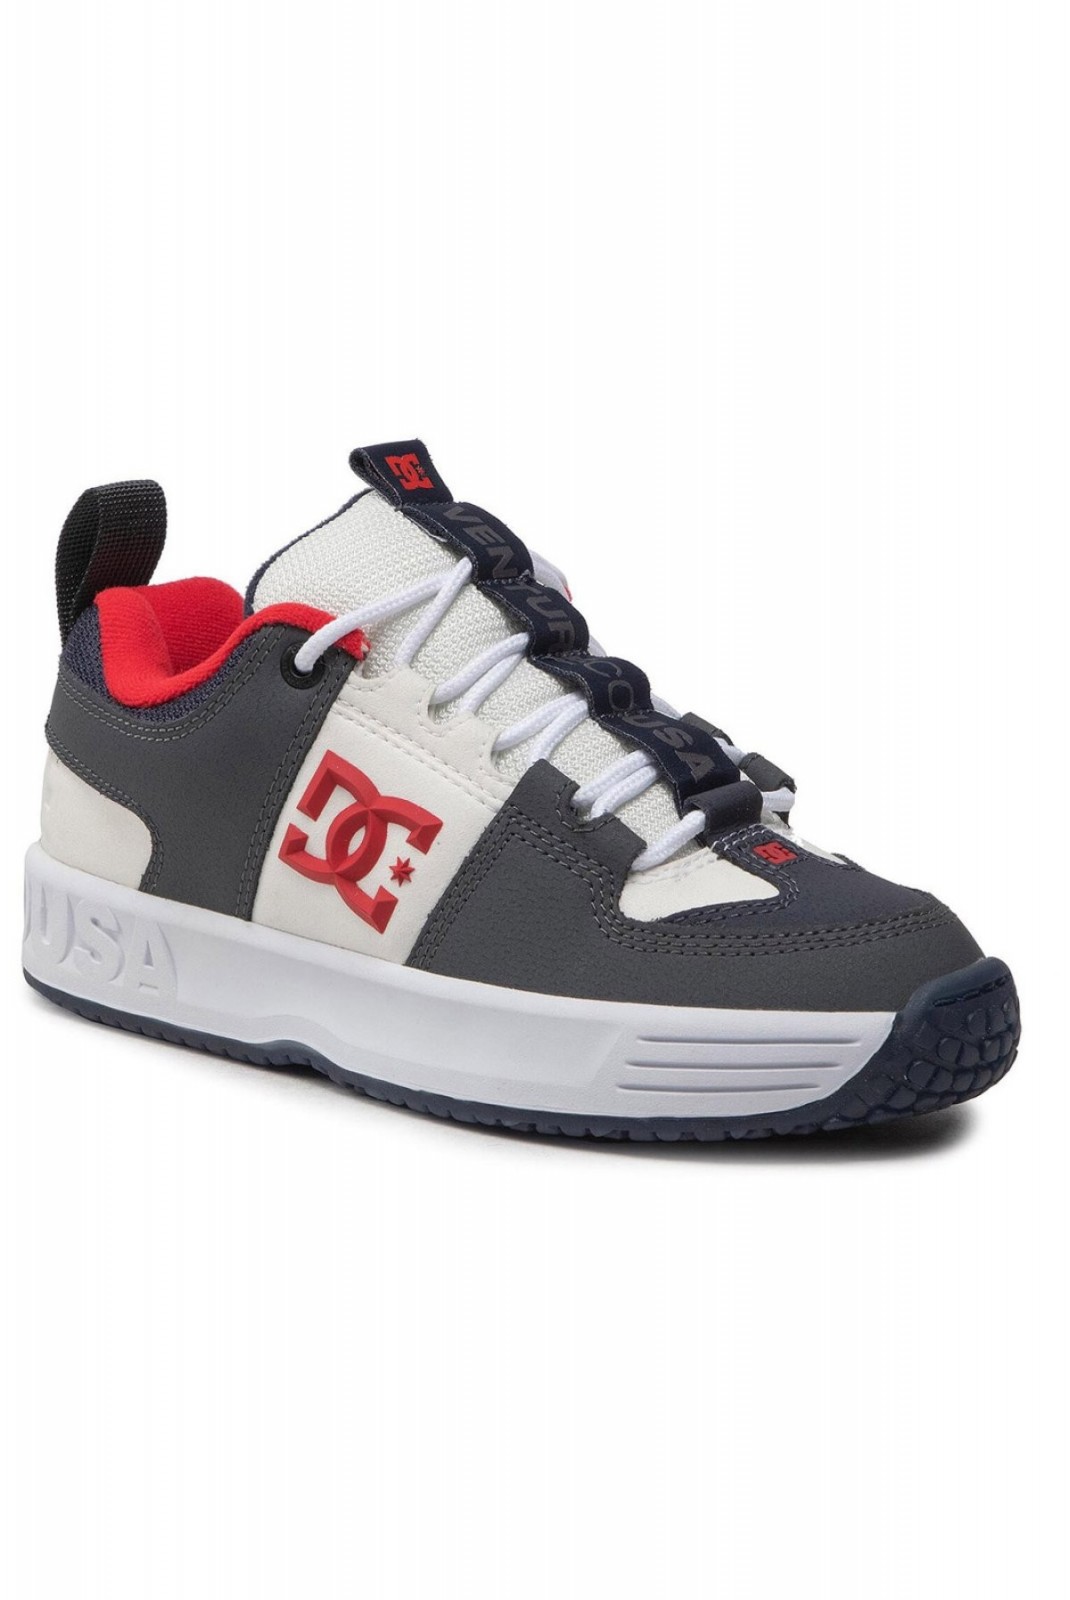 Sneakers cuir Lynx X Venture Dc shoes GN2 ADYS100697